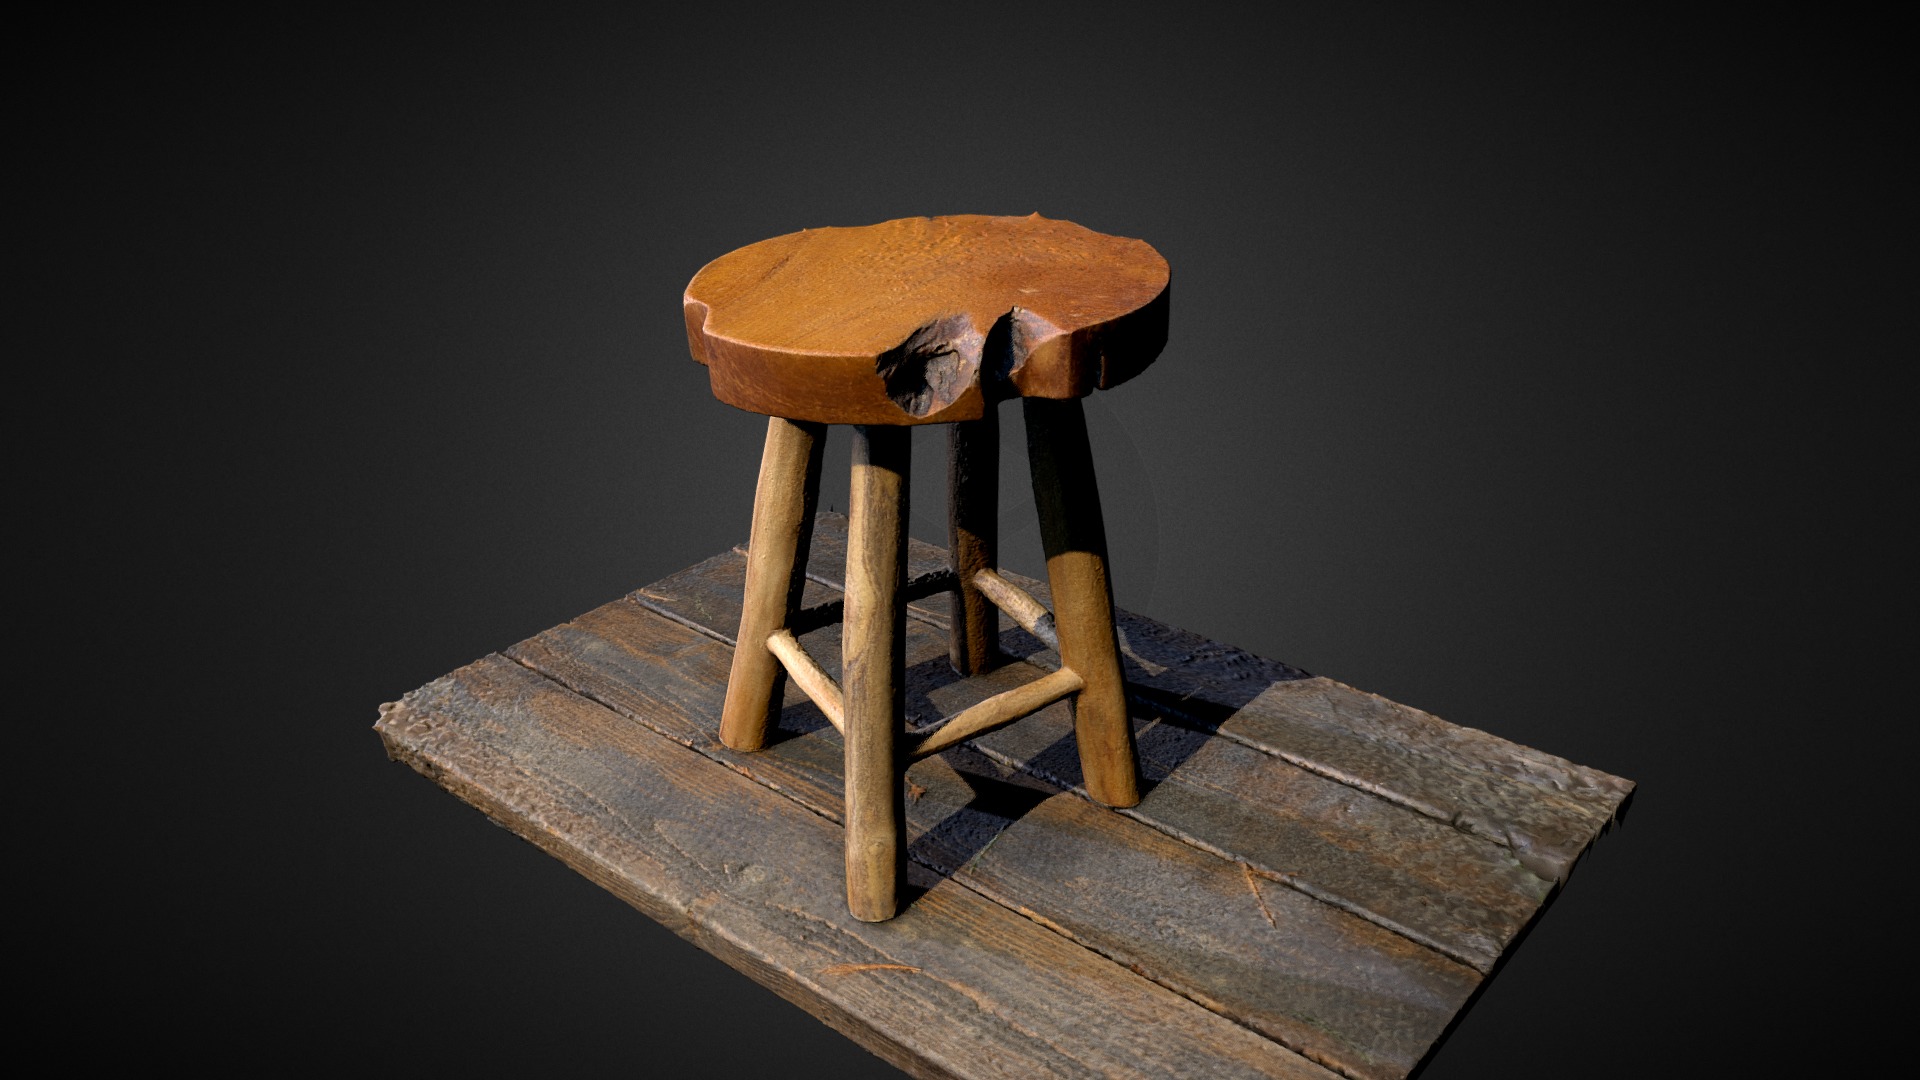 3D model Tabouret - This is a 3D model of the Tabouret. The 3D model is about a wooden chair with a table and a cat on it.